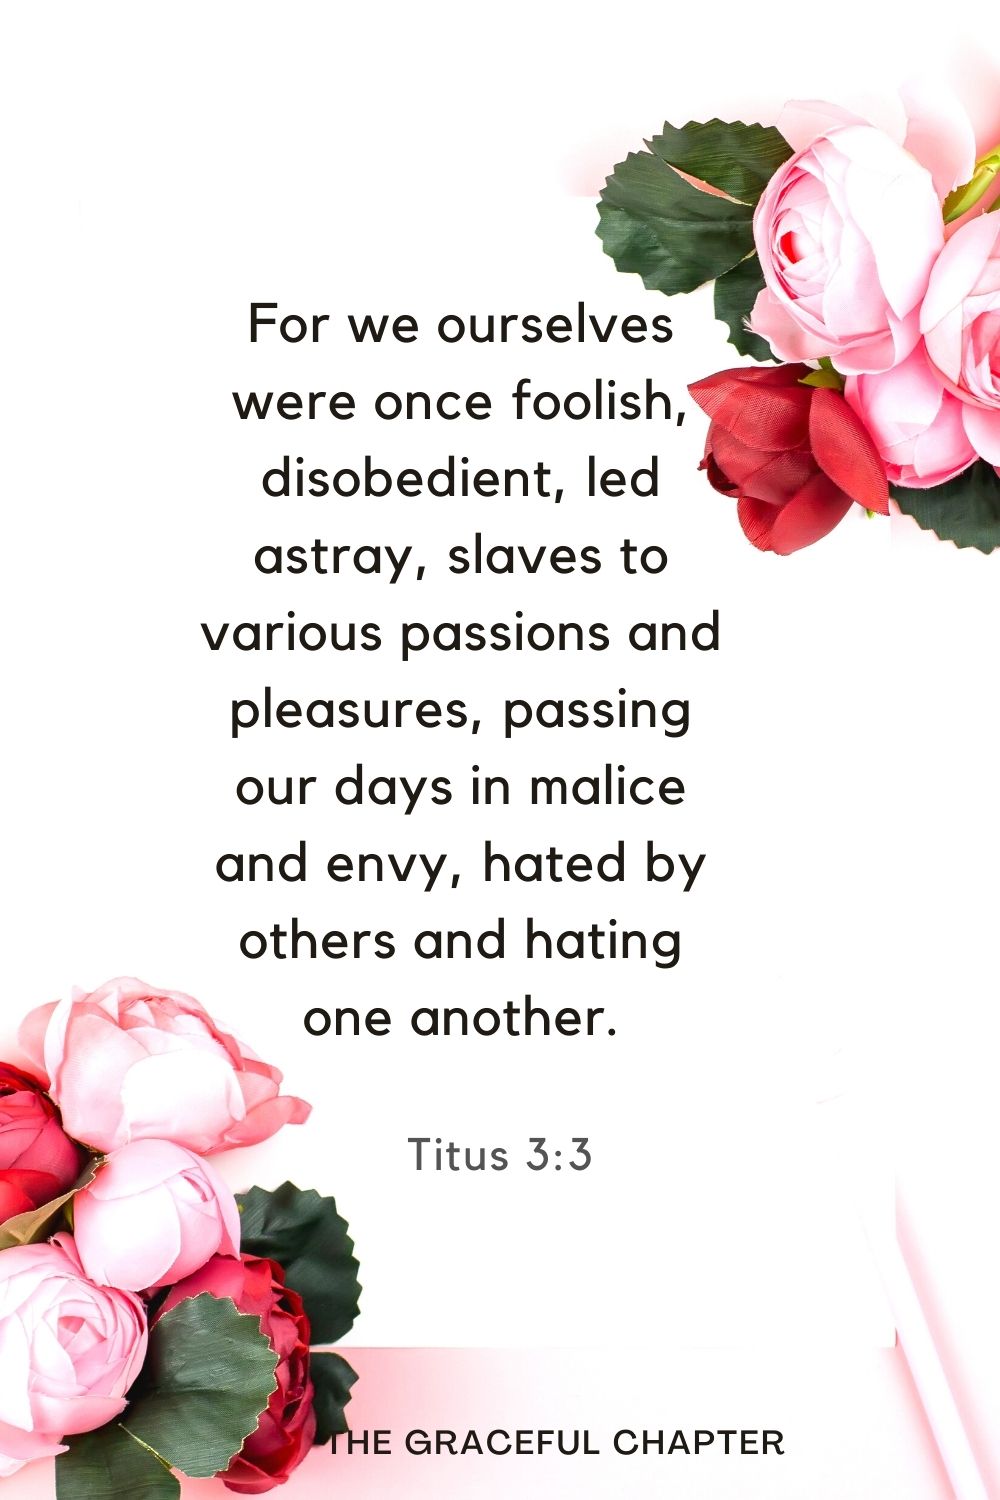 For we ourselves were once foolish, disobedient, led astray, slaves to various passions and pleasures, passing our days in malice and envy, hated by others and hating one another. Titus 3:3